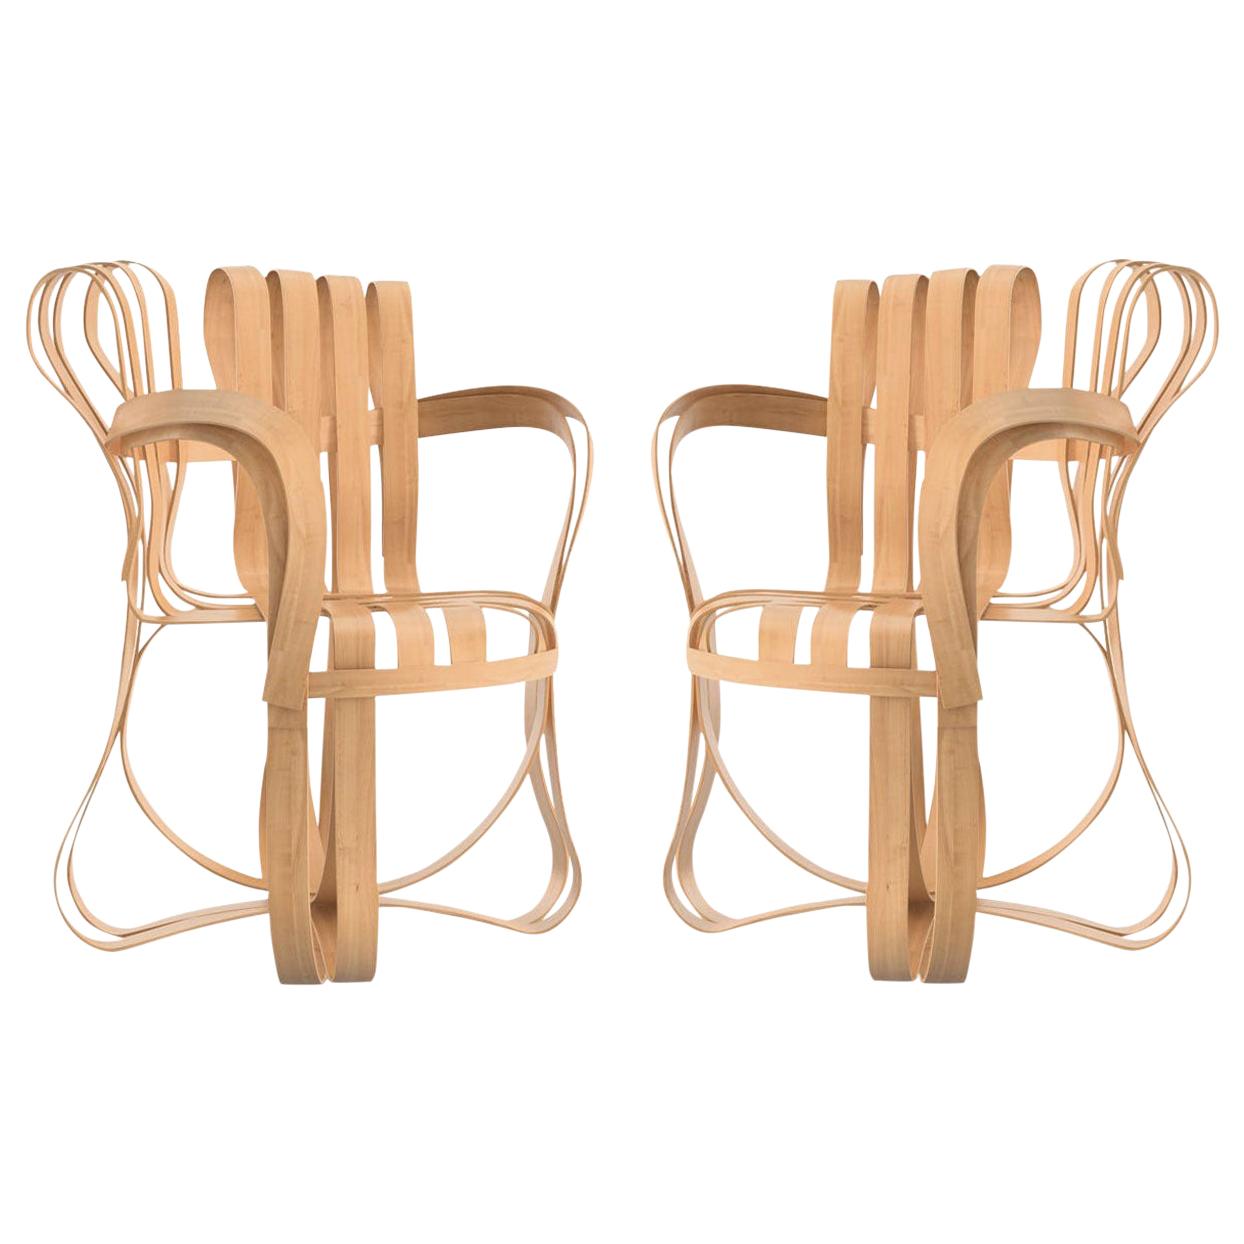 Pair of Frank Gehry for Knoll Cross Check Chairs